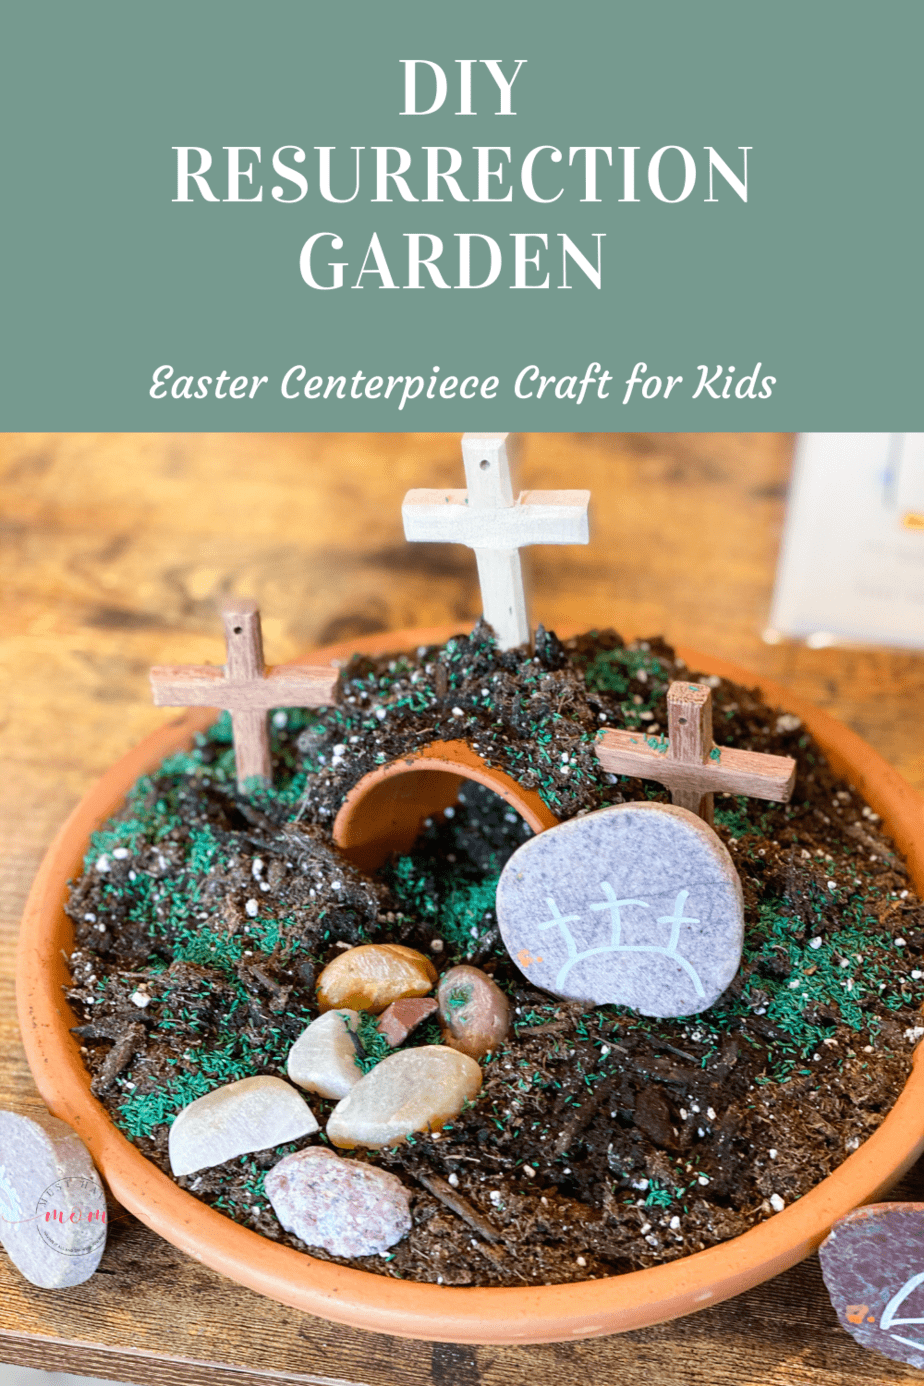 DIY Resurrection Garden for Kids. Looking for a beautiful and meaningful craft for Easter? This year we made DIY Resurrection Garden that will bloom just in time for Easter.